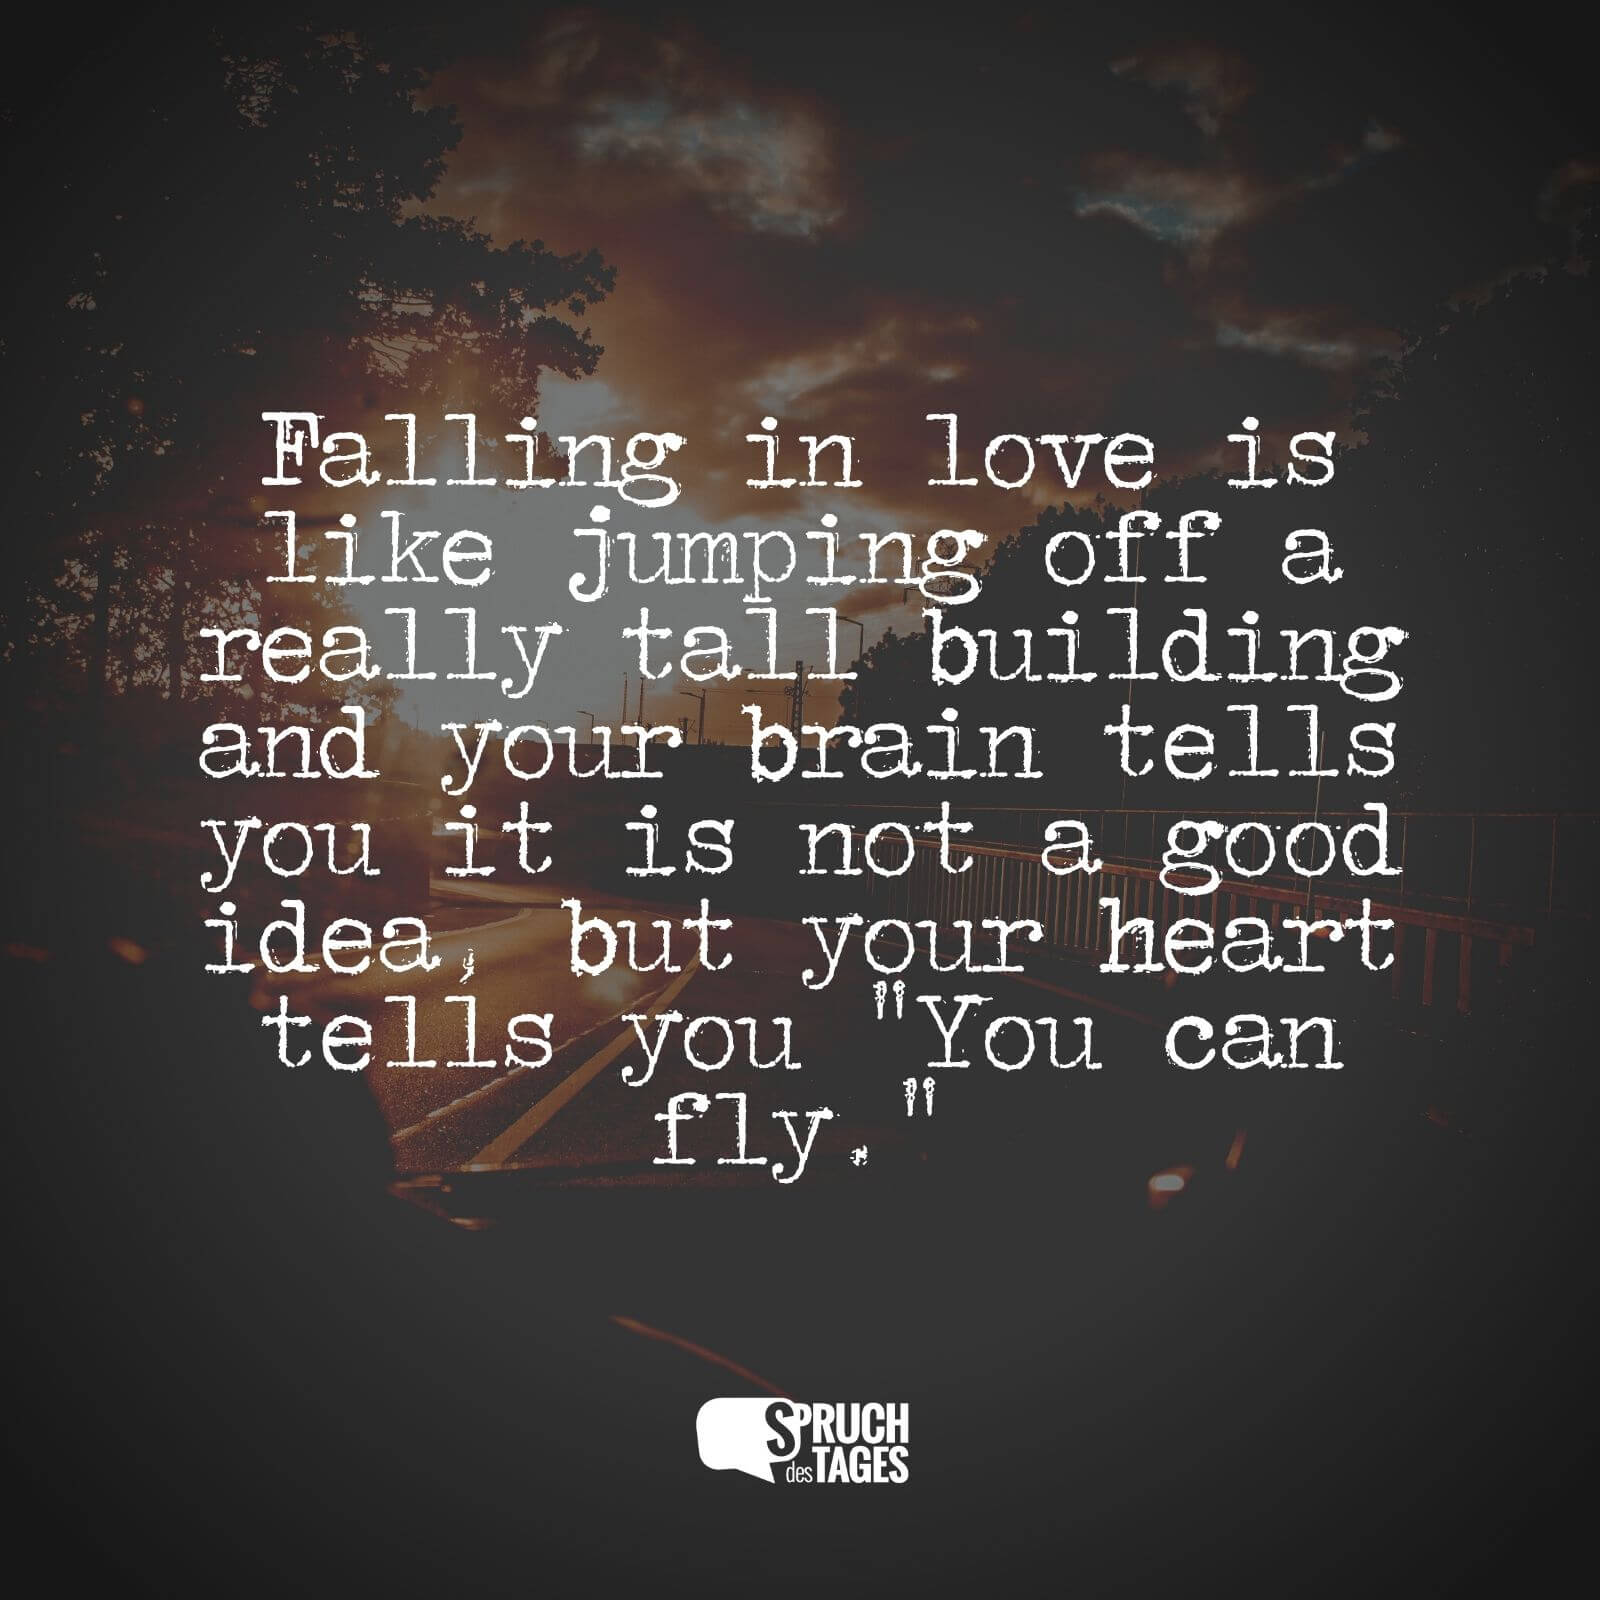 Falling in love is like jumping off a really tall building and your brain tells you it is not a good idea, but your heart tells you „You can fly.“